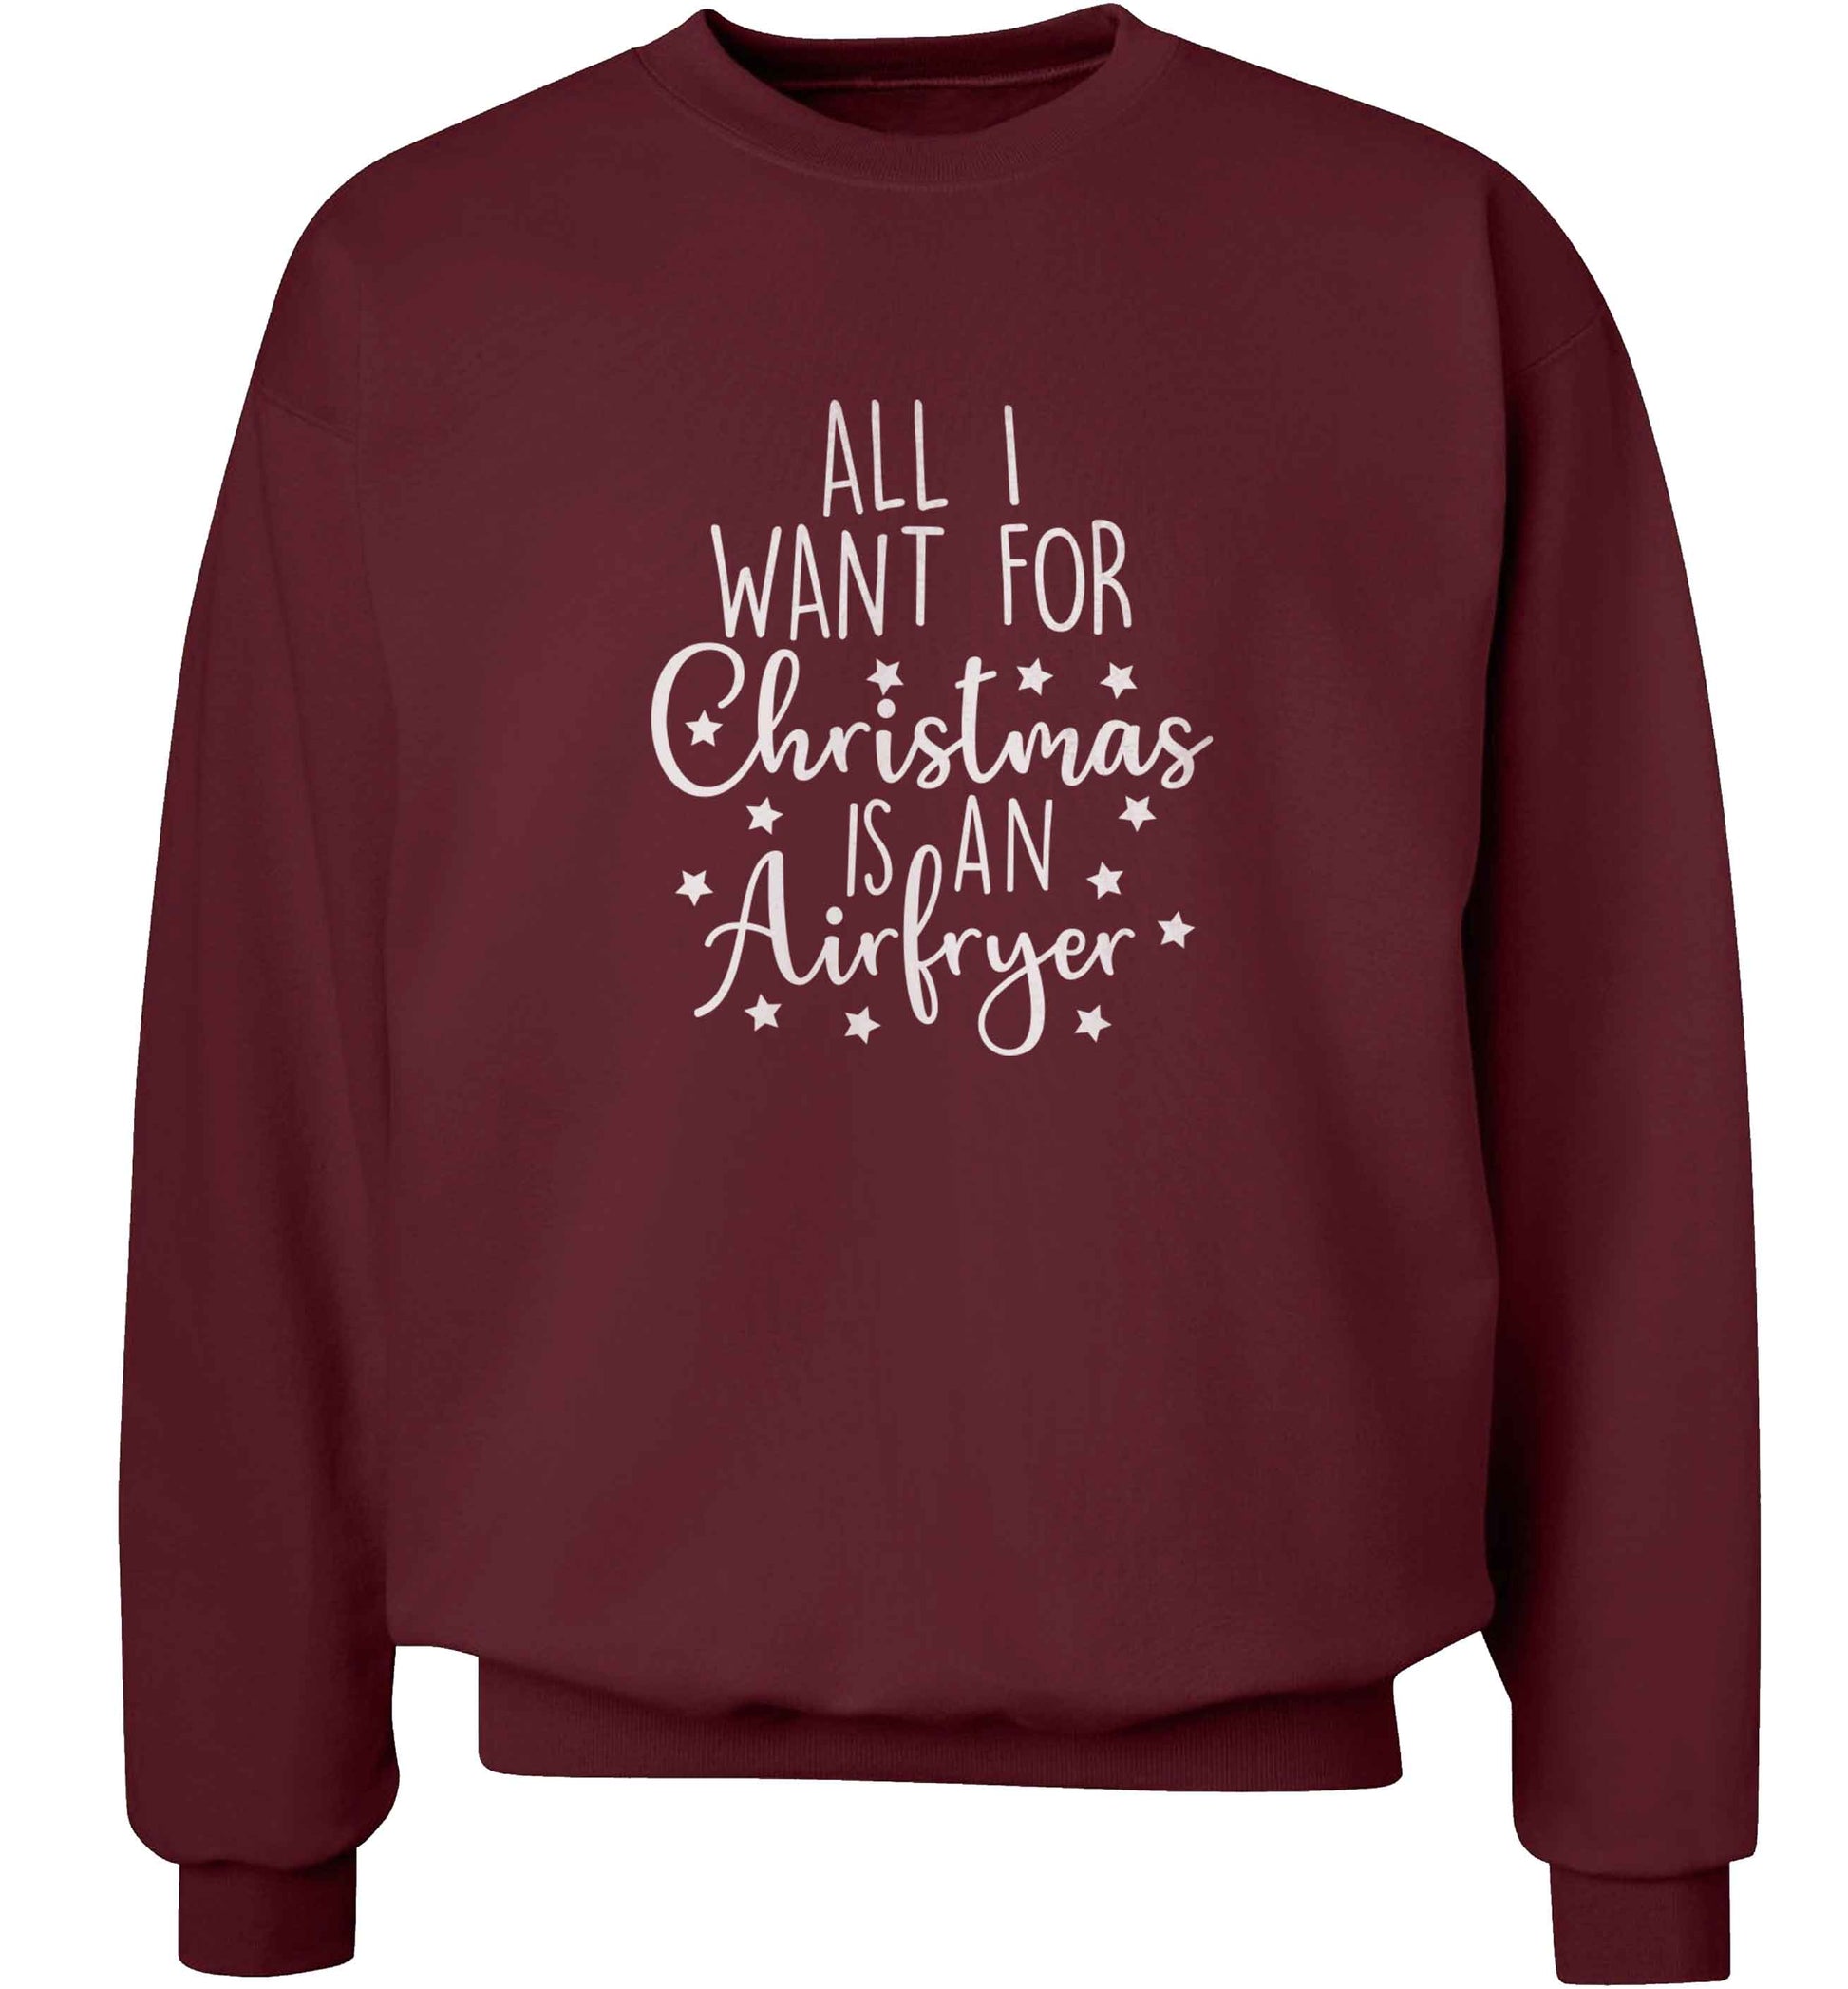 All I want for Christmas is an airfryeradult's unisex maroon sweater 2XL